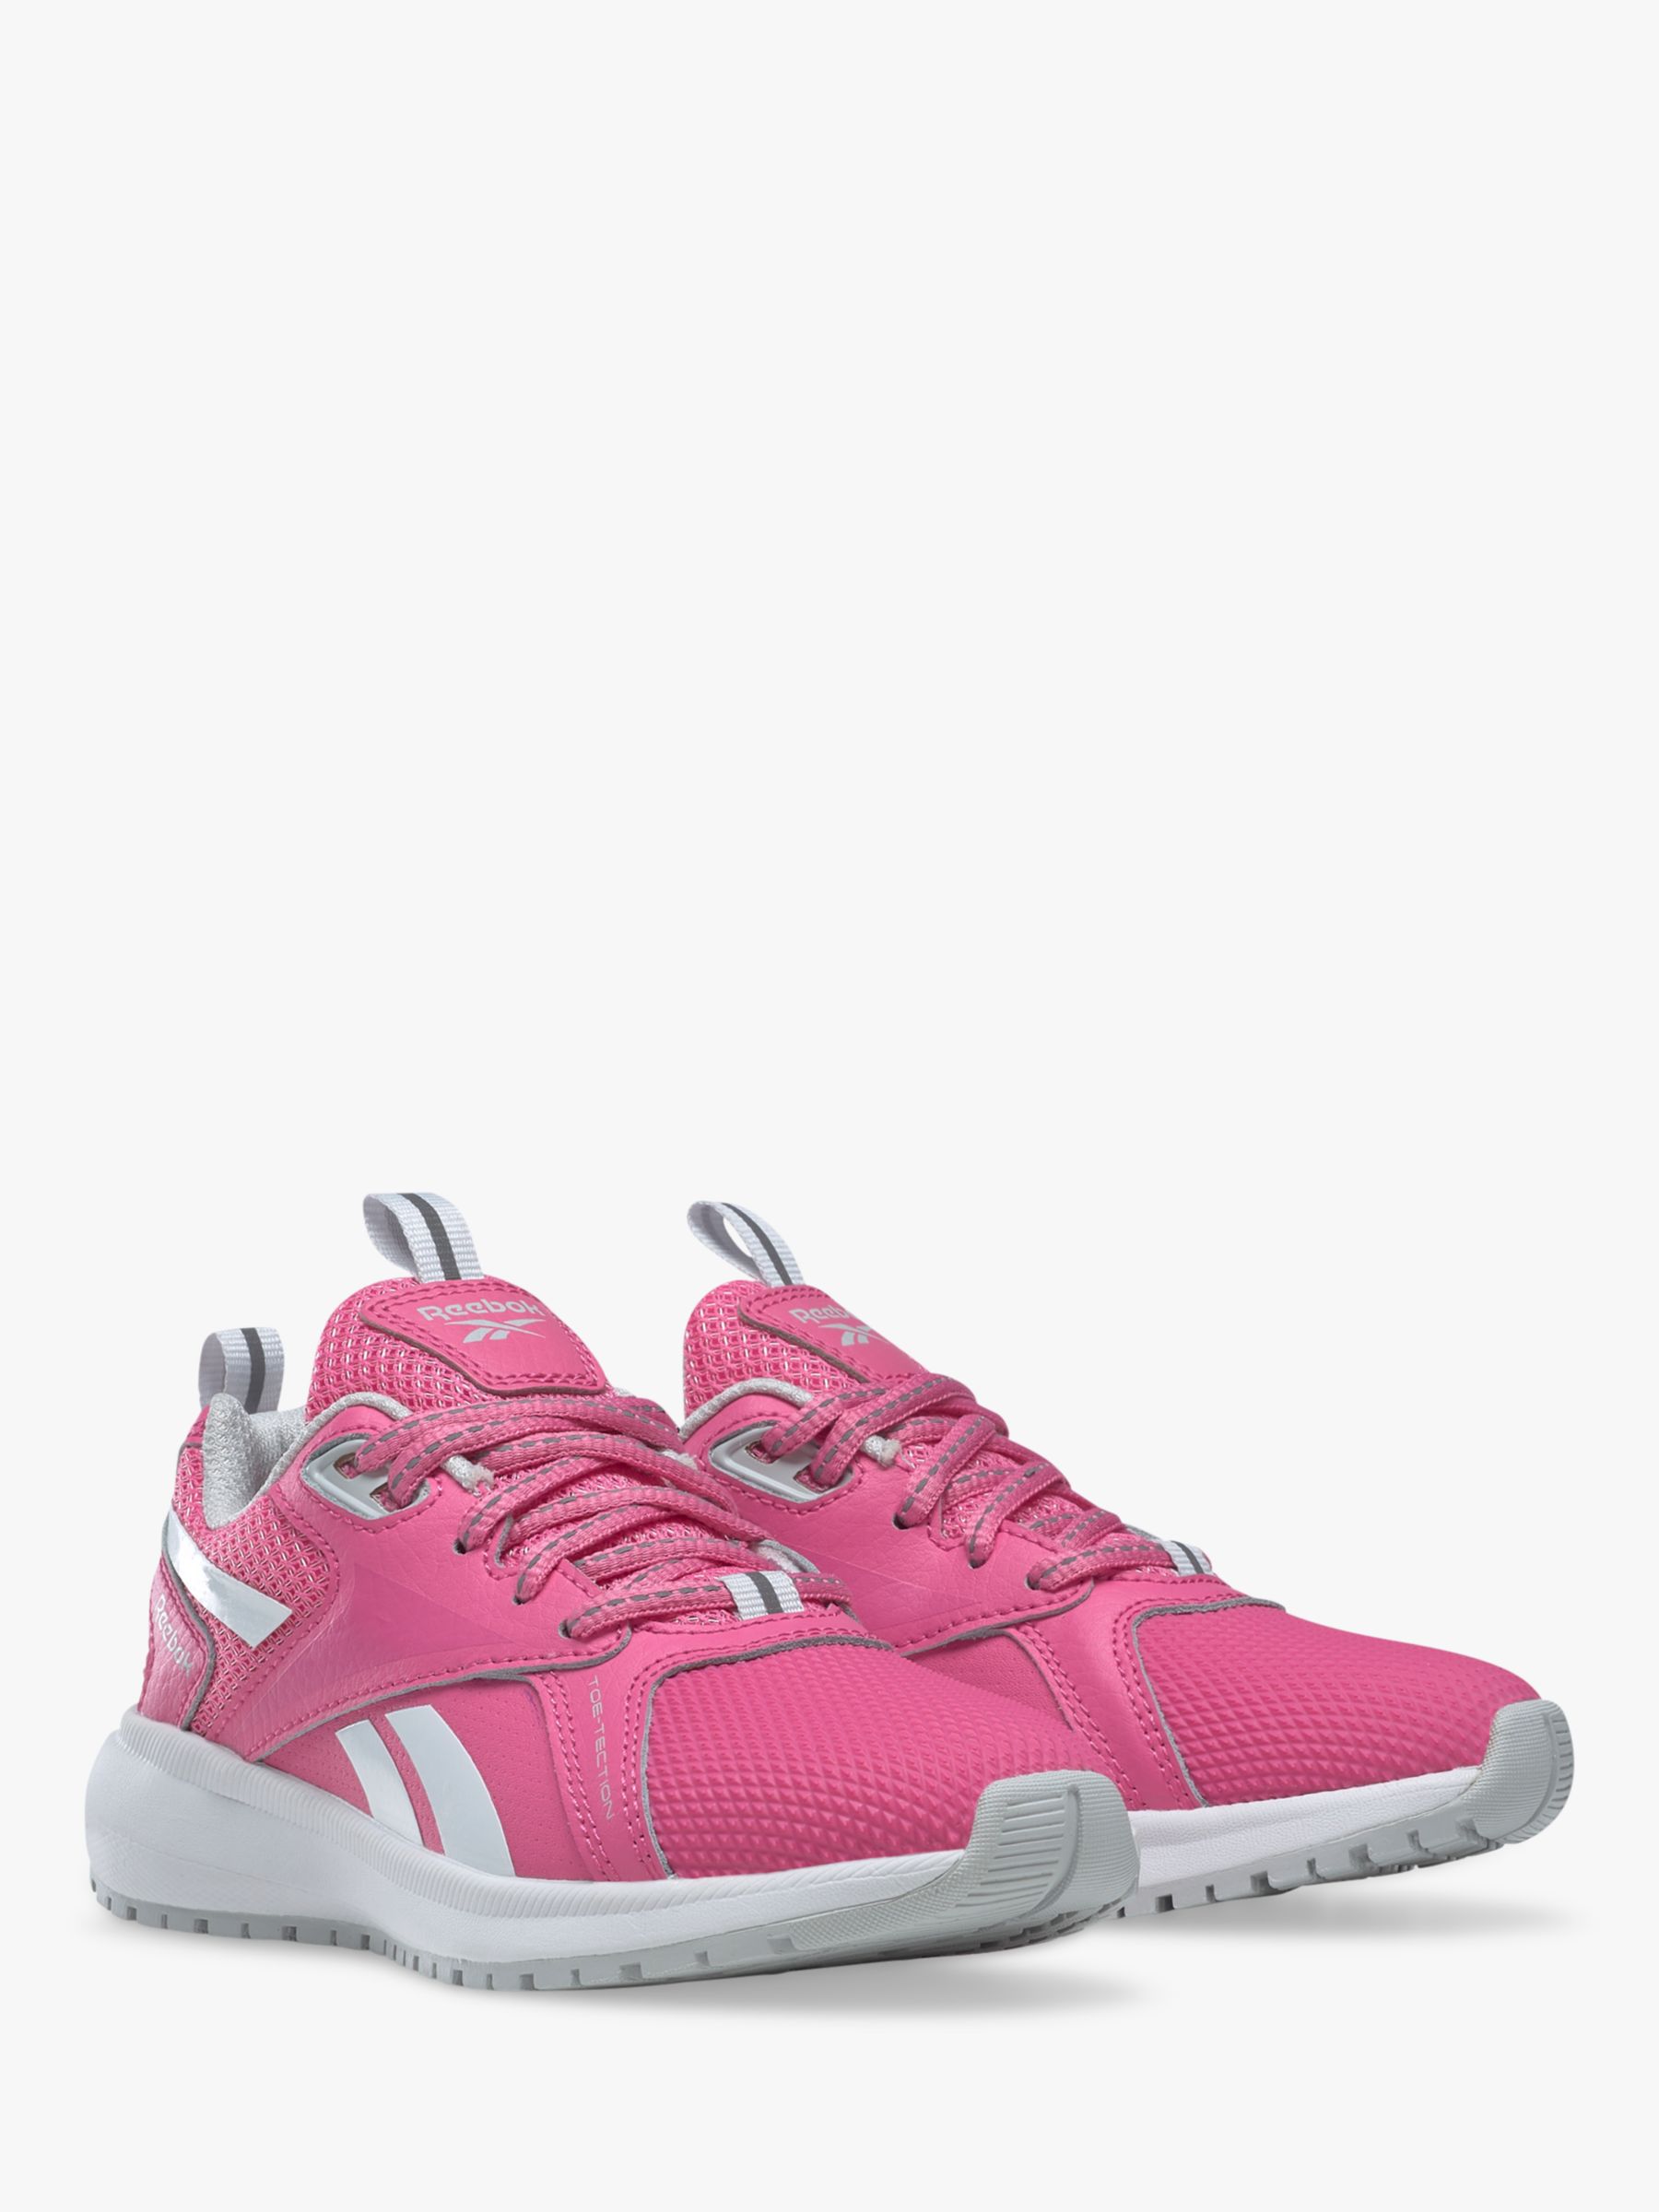 Reebok Kids' Durable XT Trainers, True Pink/Pure Grey 2/Ftwr White at John  Lewis & Partners